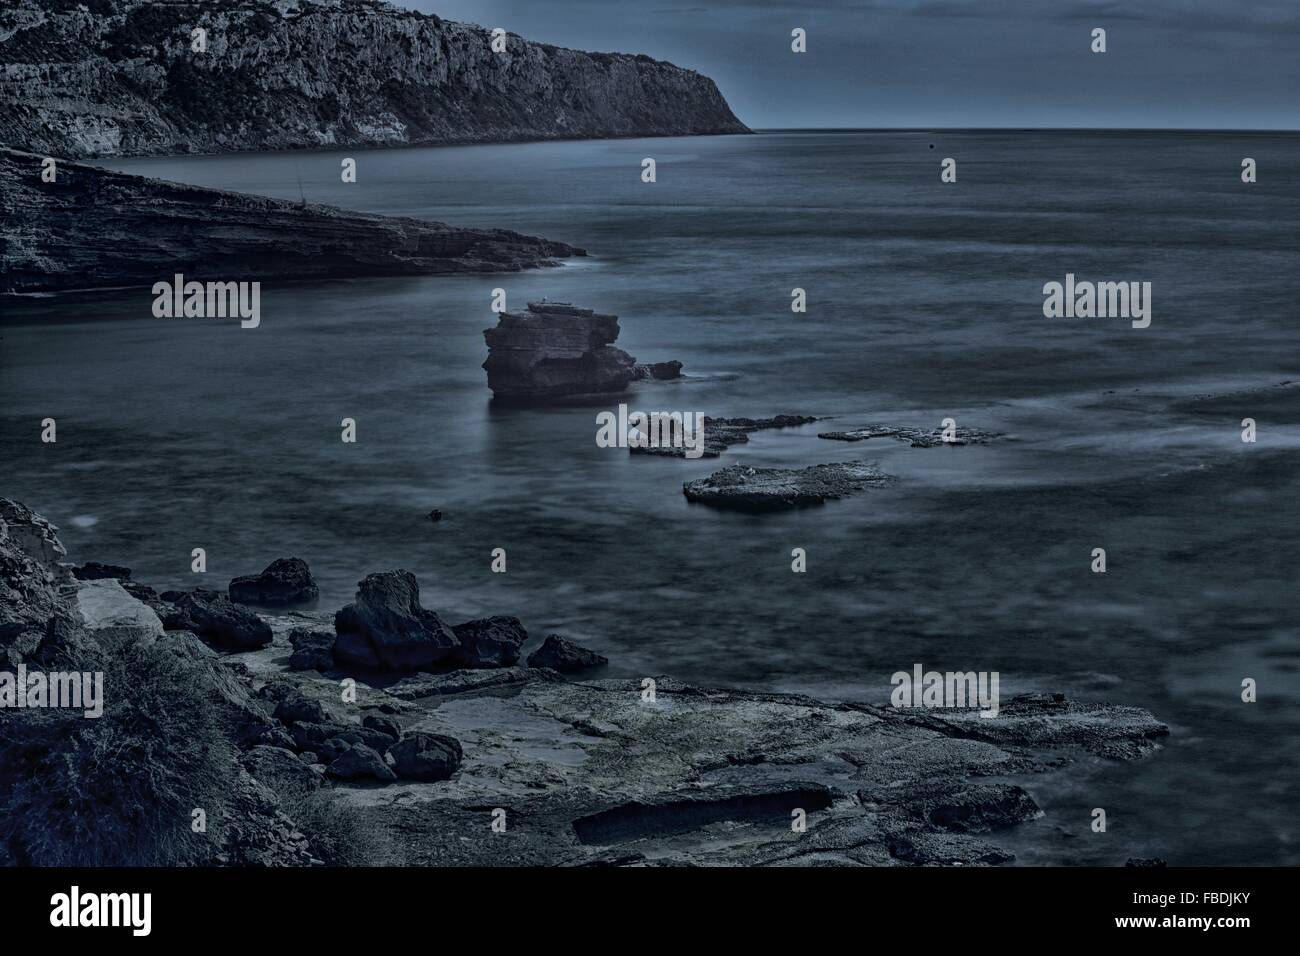 Scenic View Of Sea At Night Stock Photo